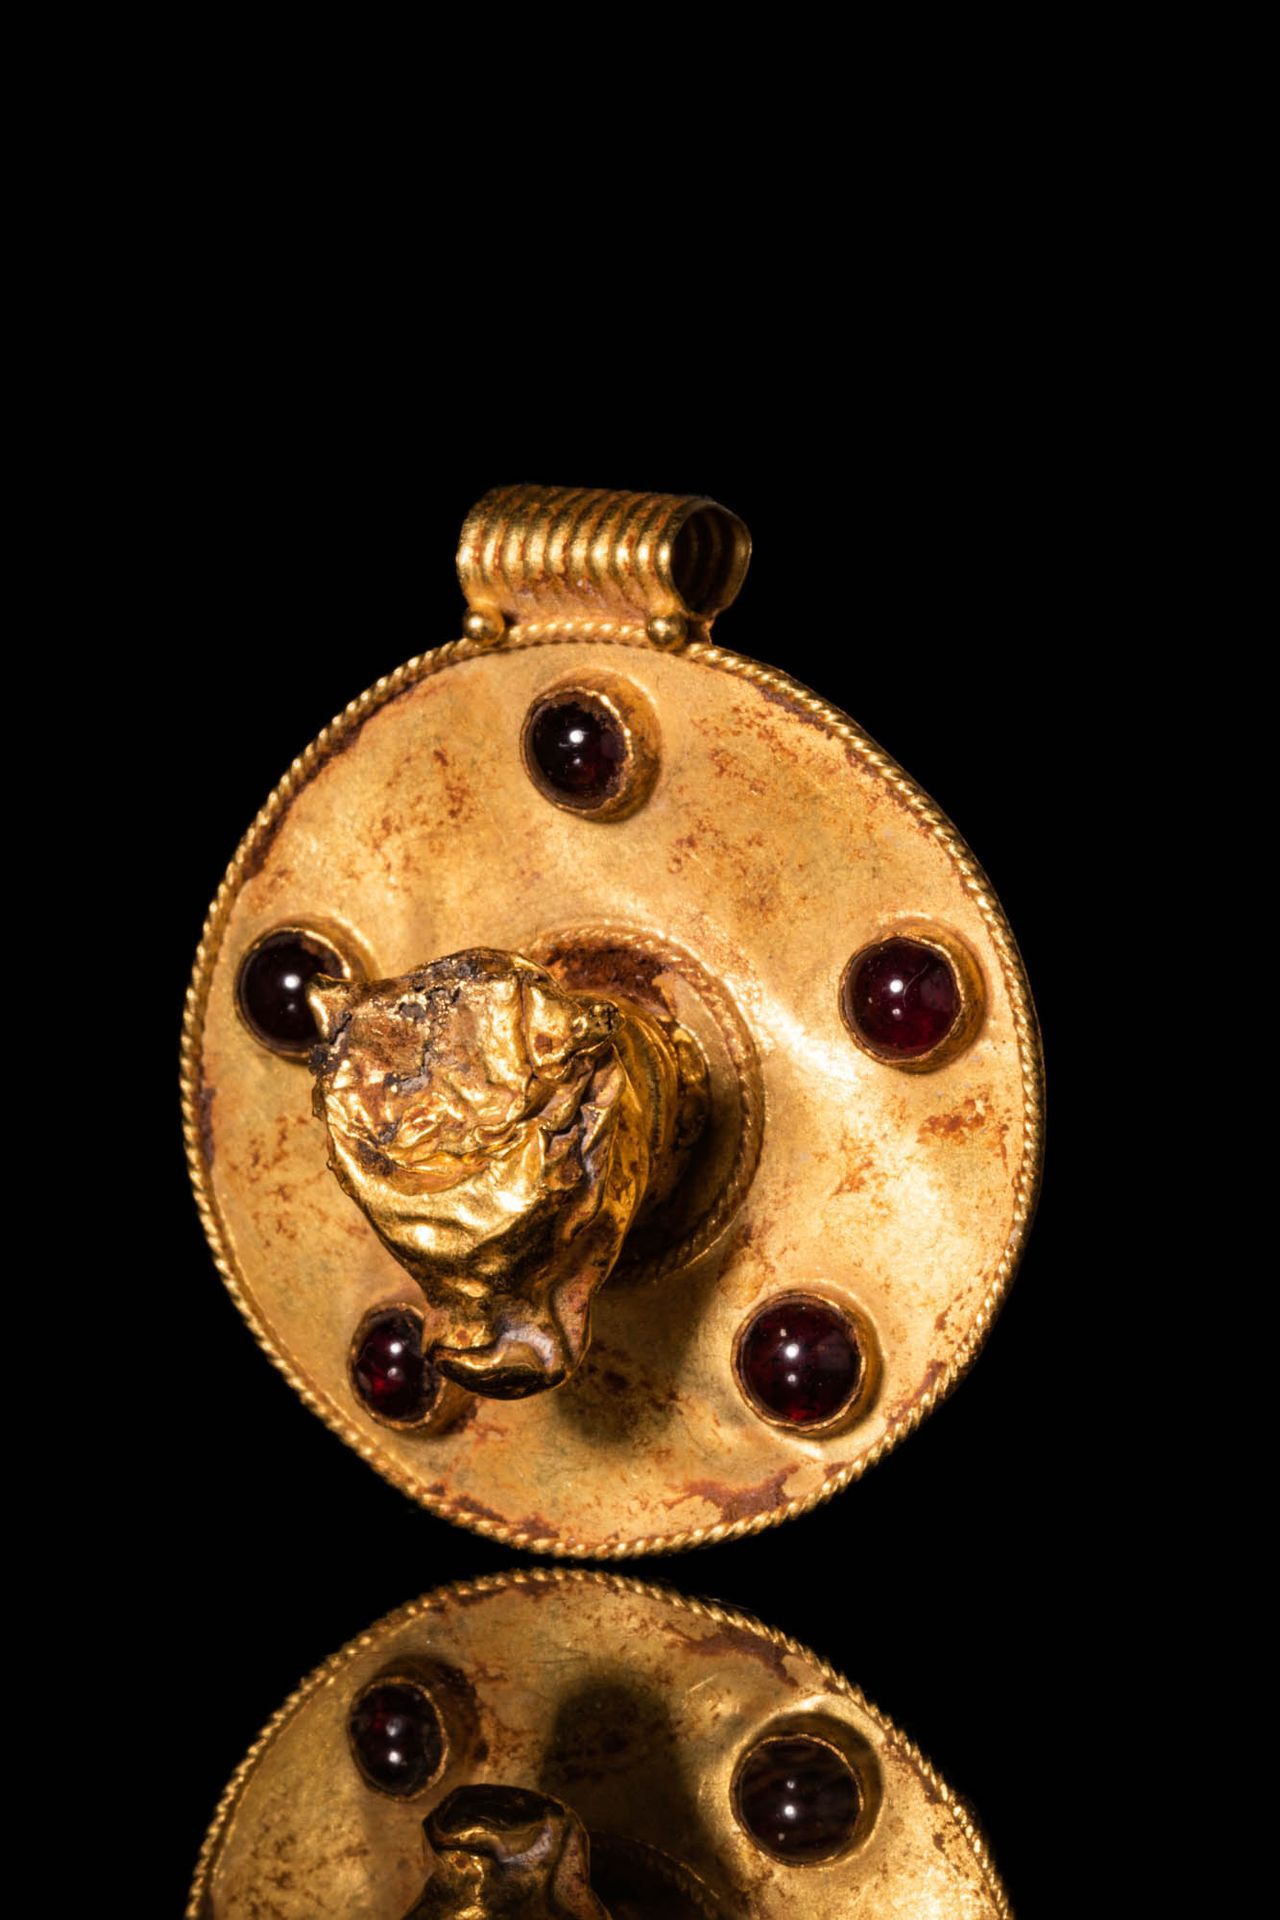 HELLENISTIC GOLD PENDANT WITH CENTRAL BULL PROTOME Ca. 400 V. CHR.
Hellenistisch&hellip;